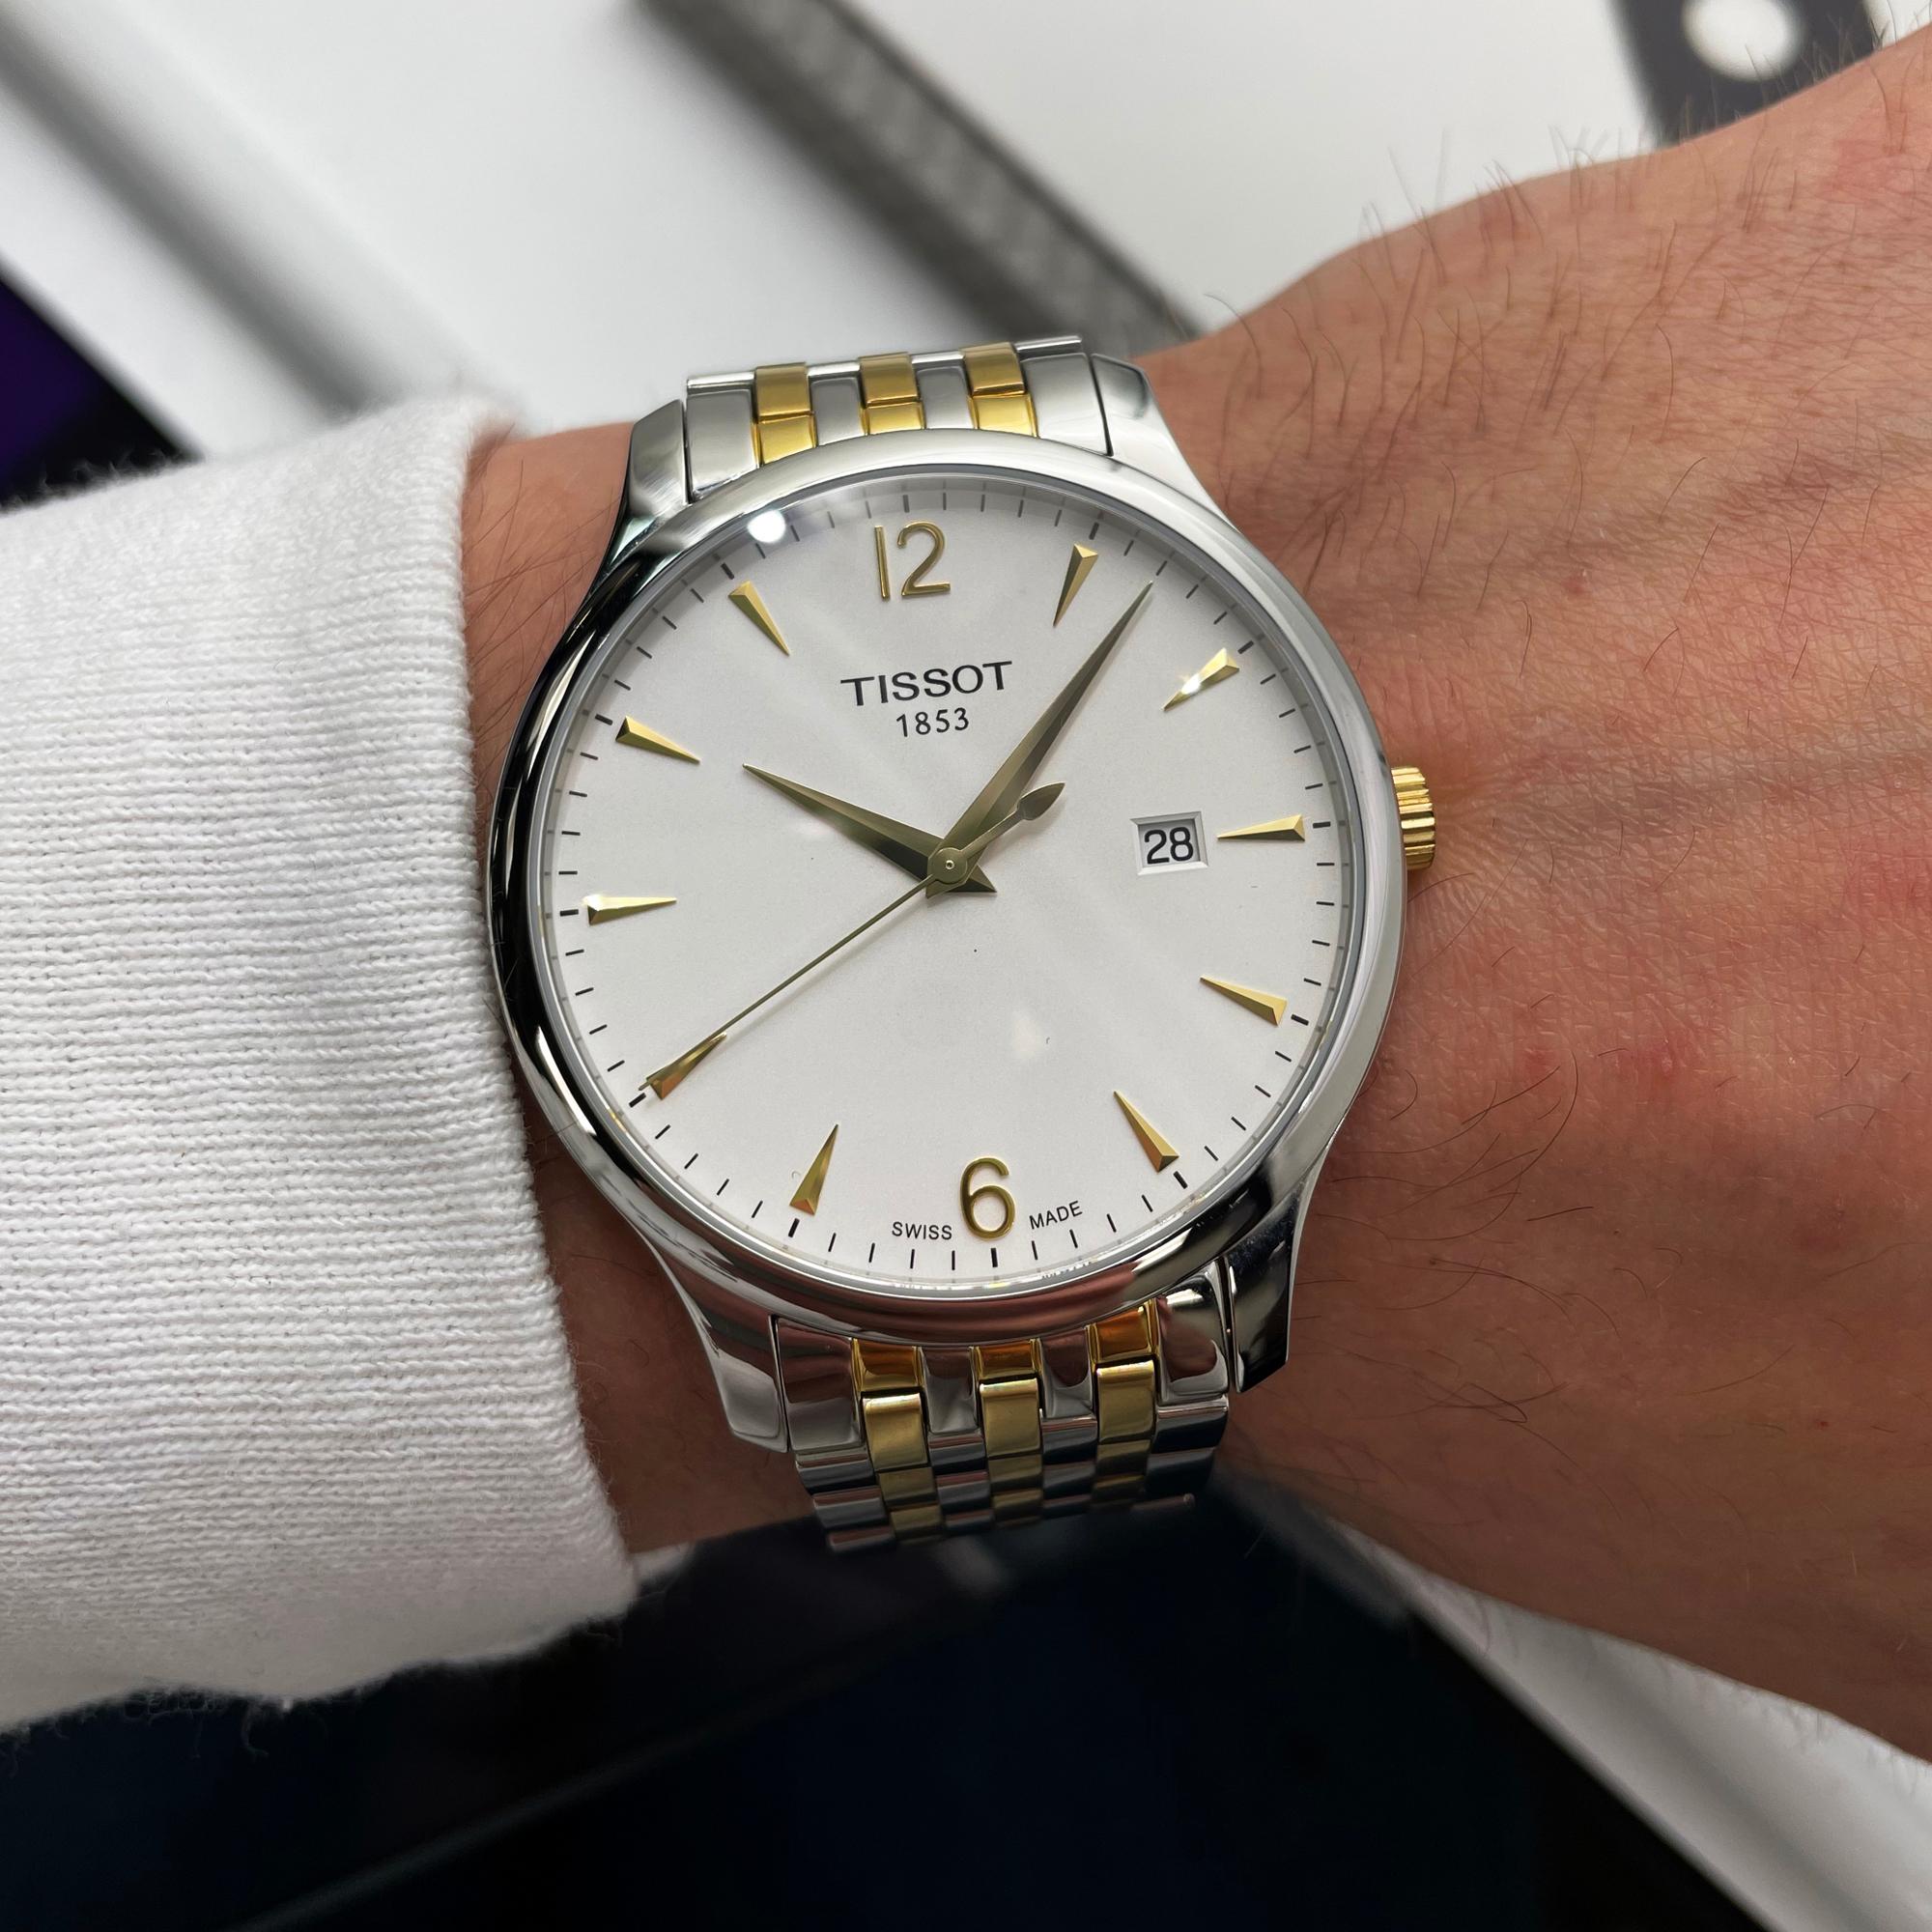 Tissot T-Classic Two Tone Steel White Dial Quartz Watch T063.610.22.037.00 In New Condition For Sale In New York, NY